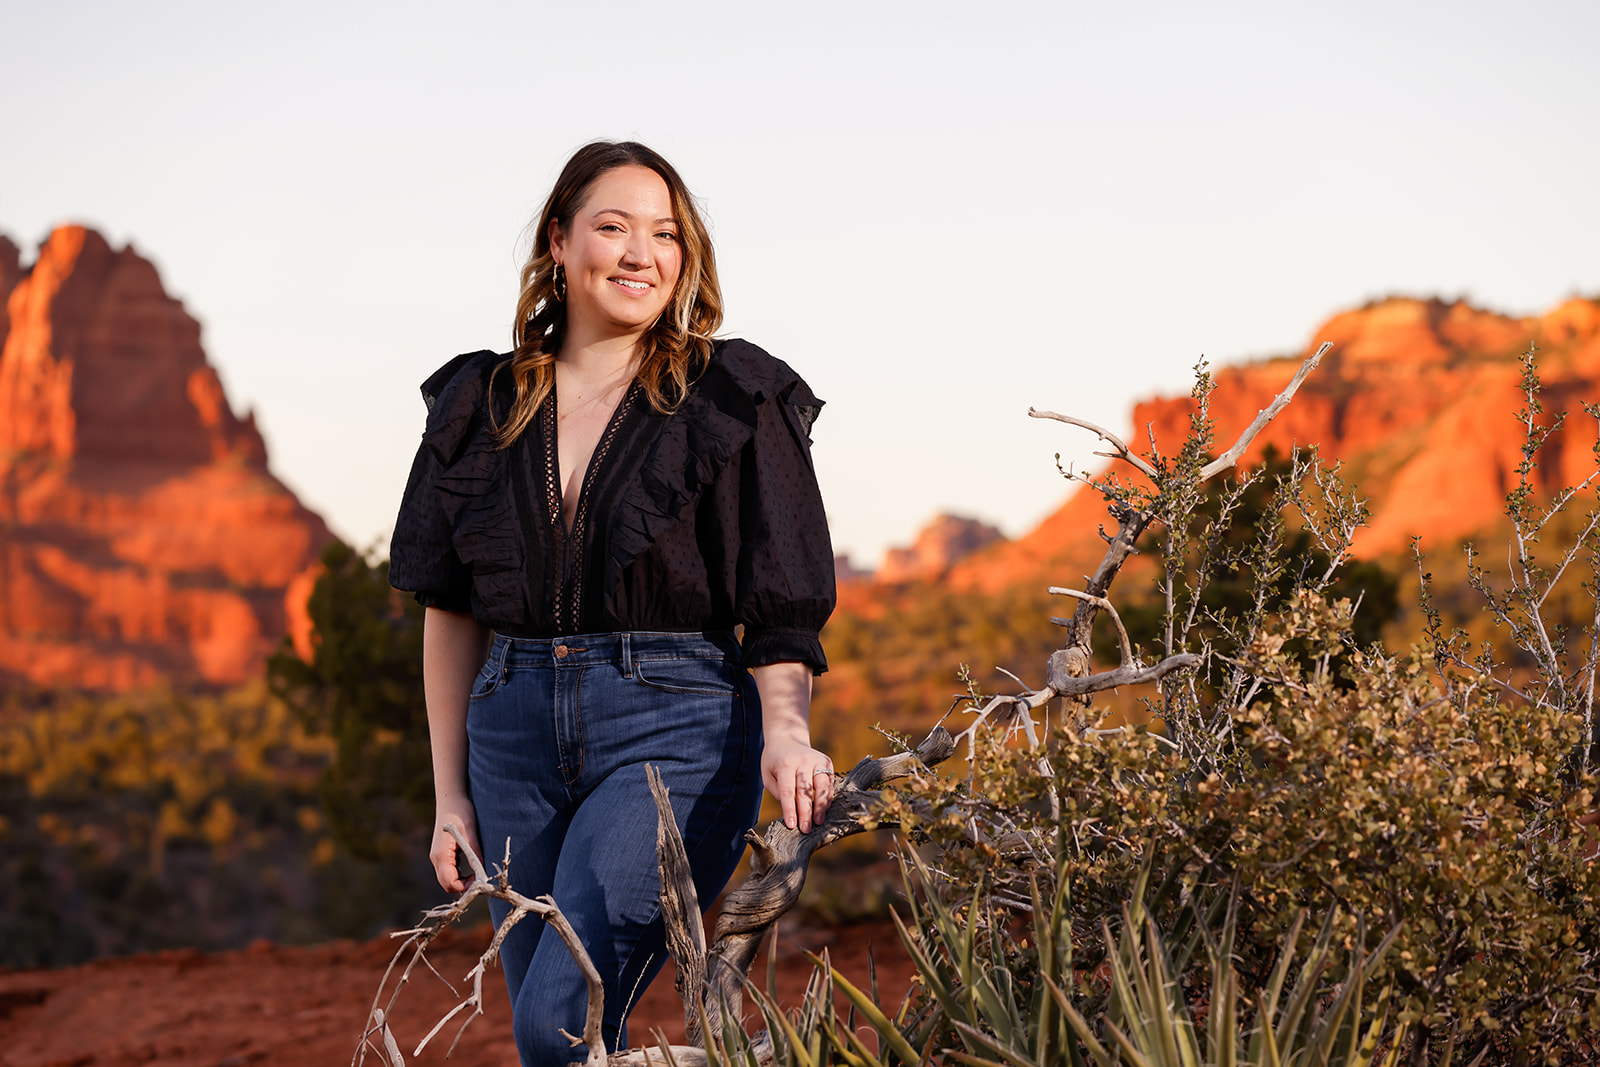 Sedona personal branding portrait photographer, classic, fun, natural outdoor photo session in the red rocks of Arizona